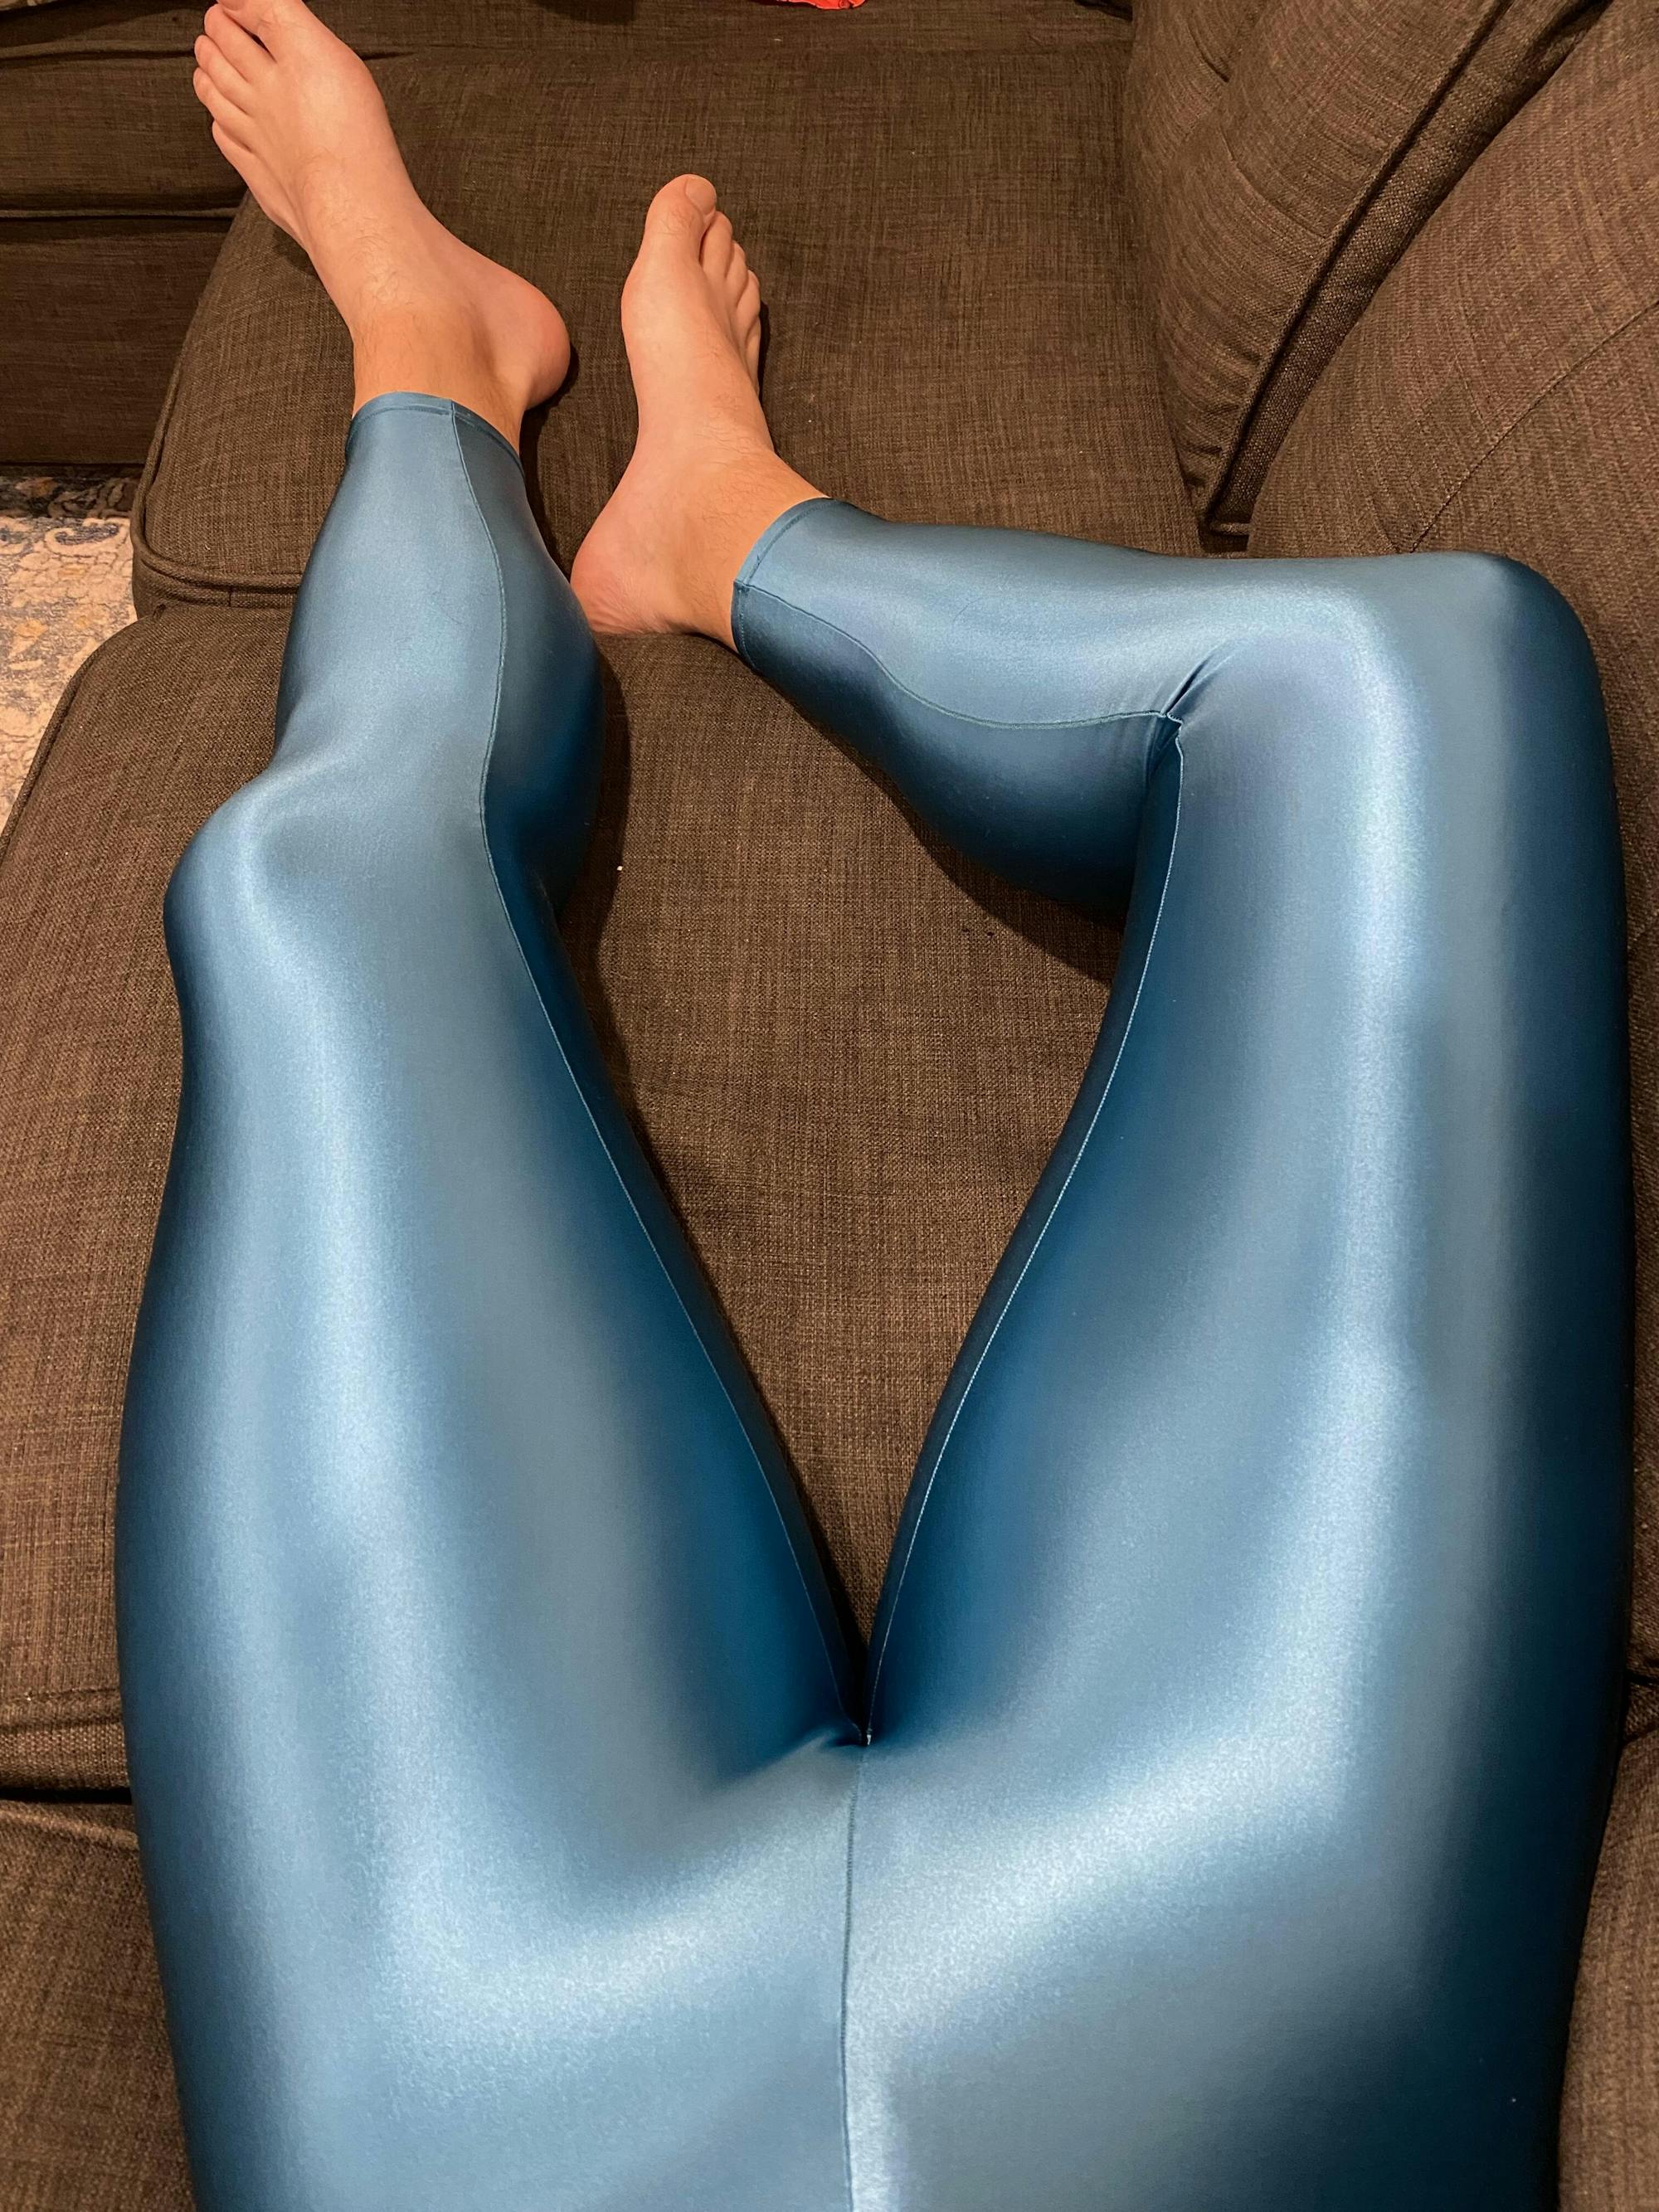 So Shiny - We love Spandex! : Photo  Leotards, 80s workout outfit, Blue  leotard